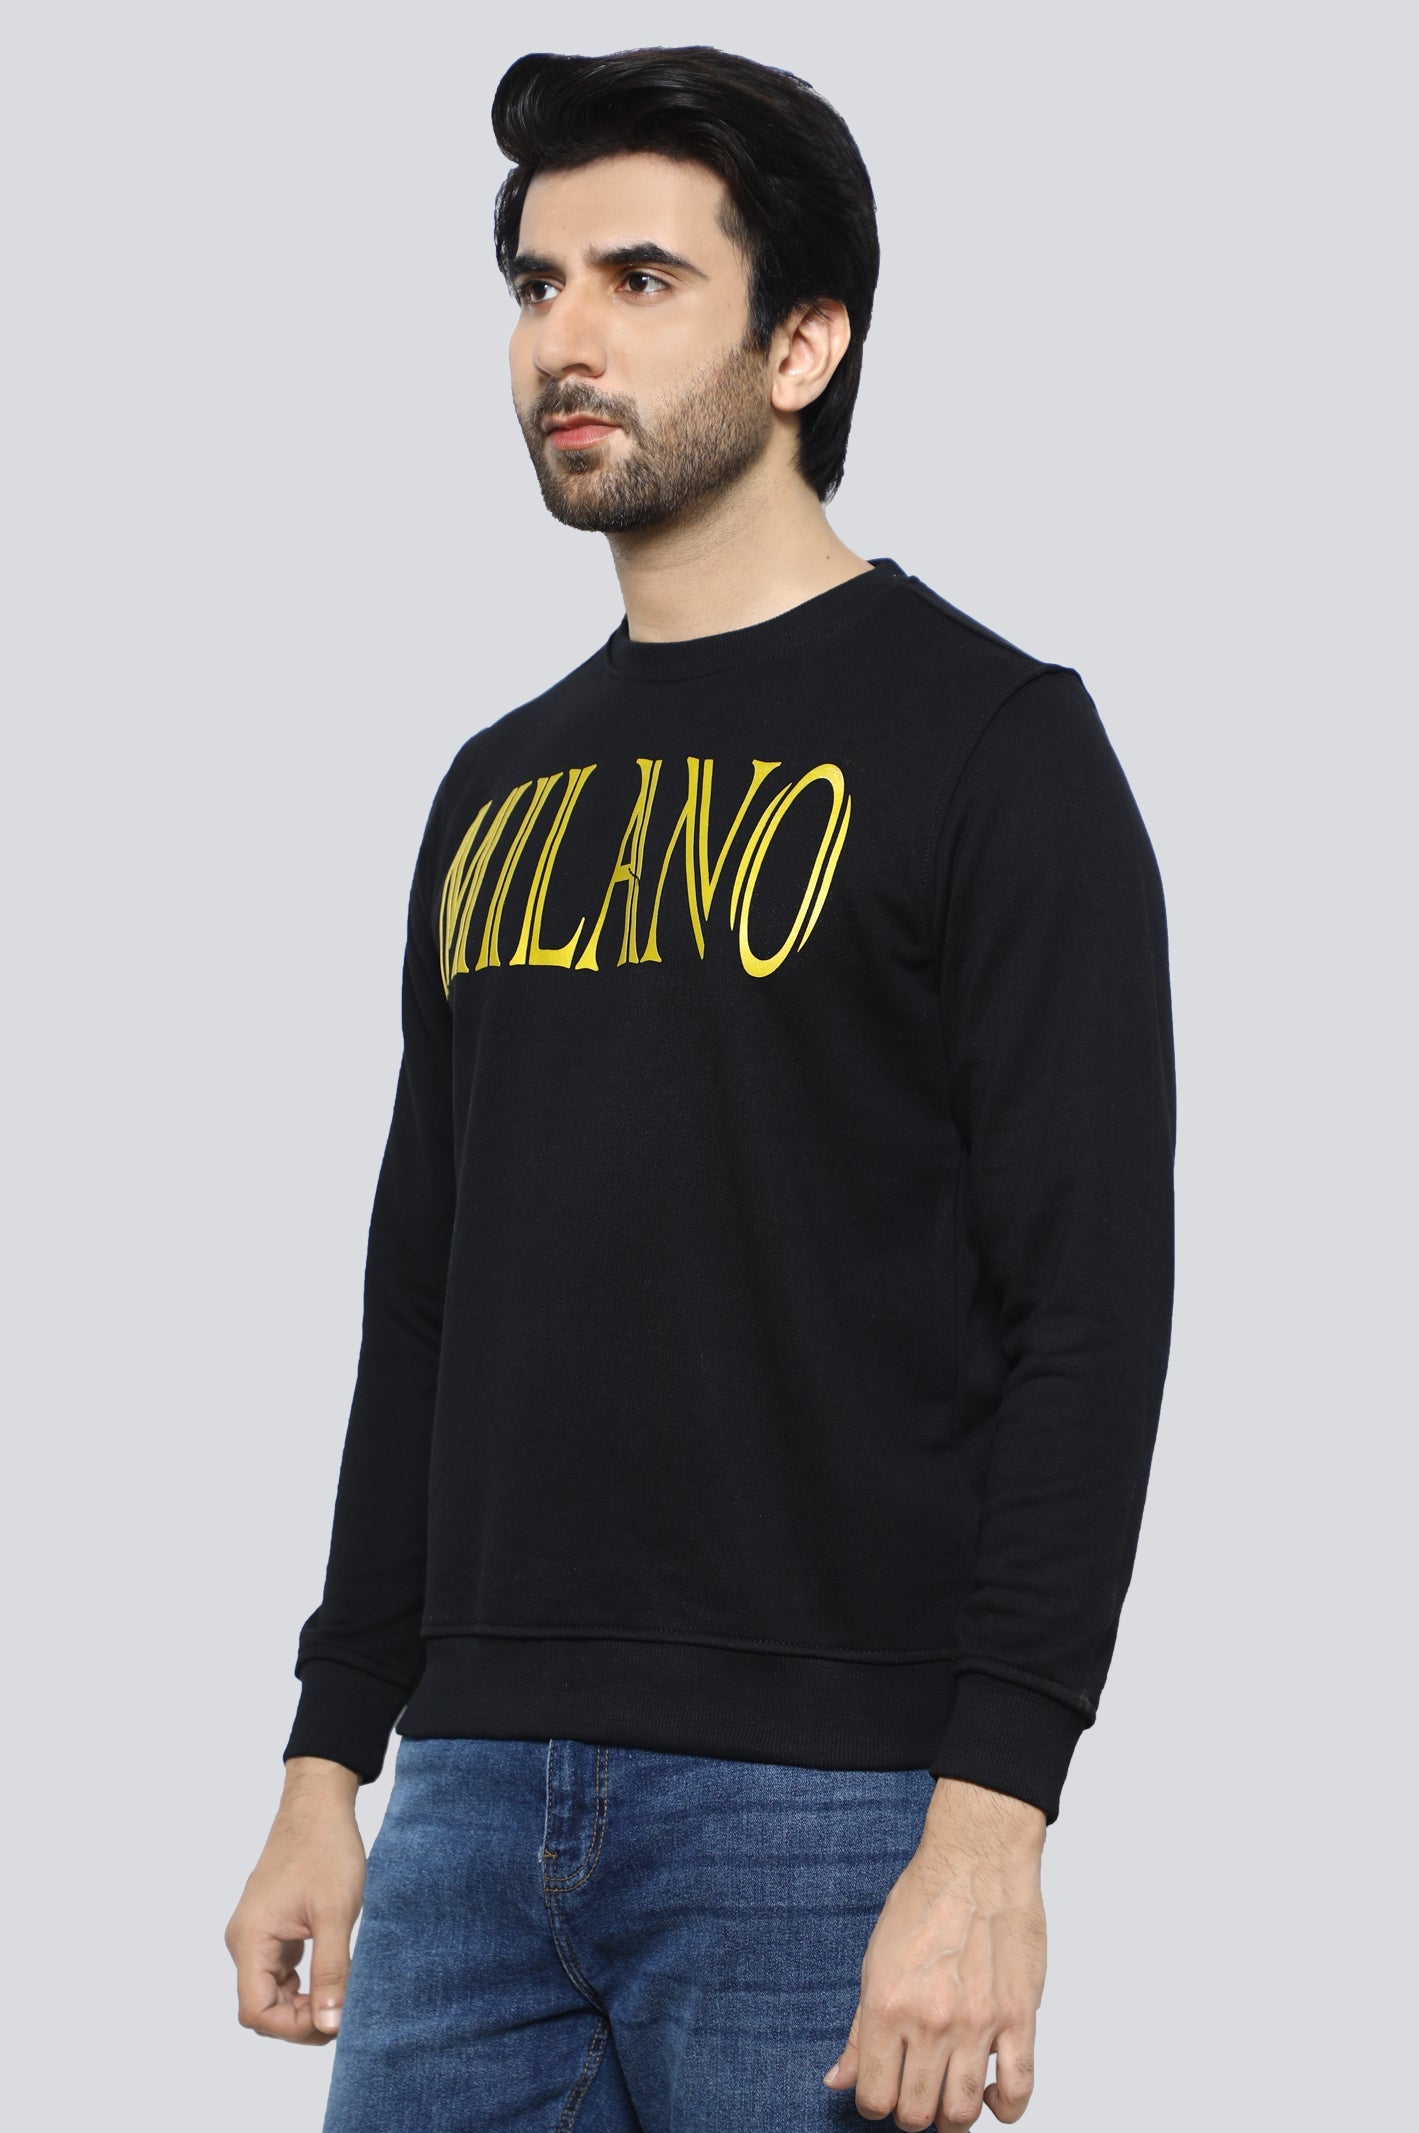 Sweat Shirt for Men's - Diners